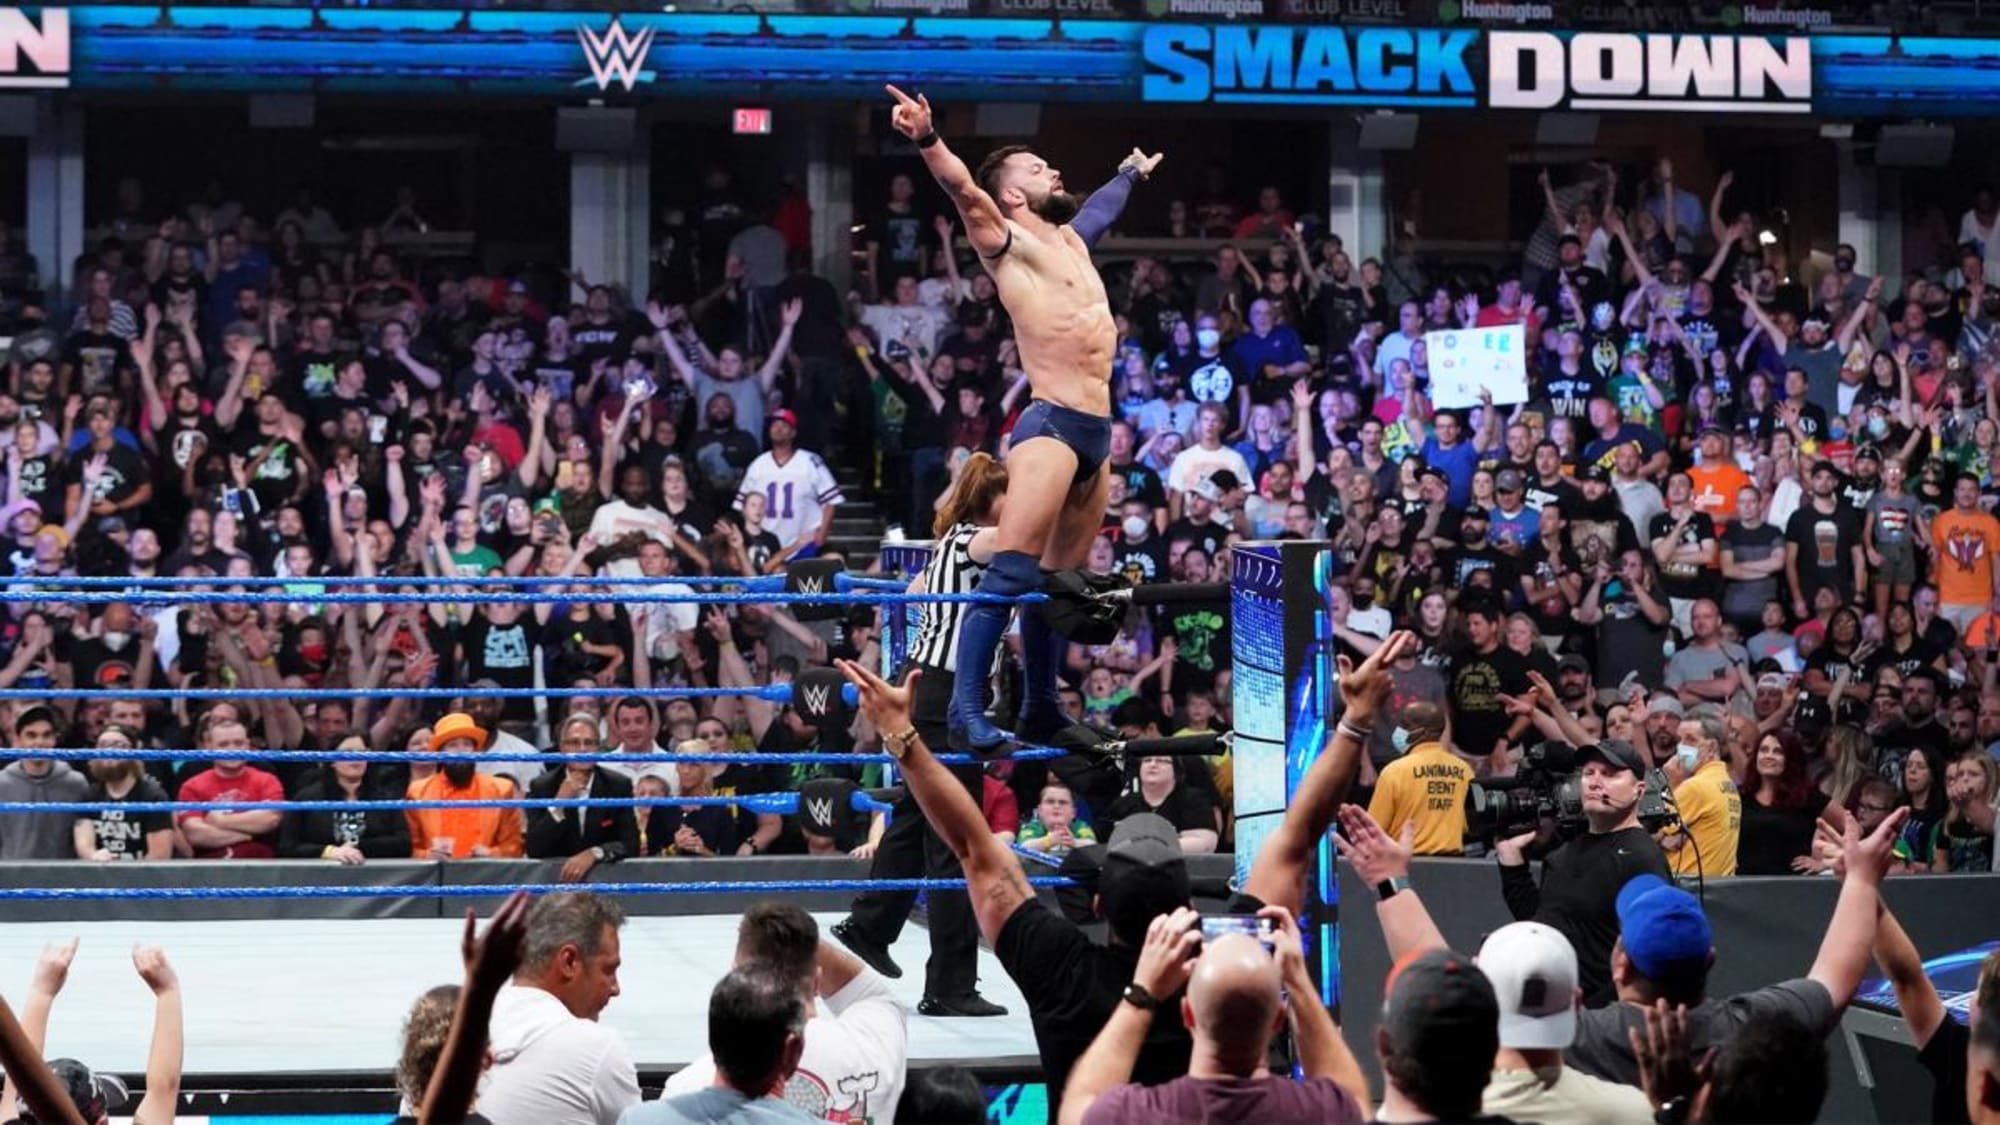 Wwe Smackdown Results August 6 Finn Balor Wins In Main Event